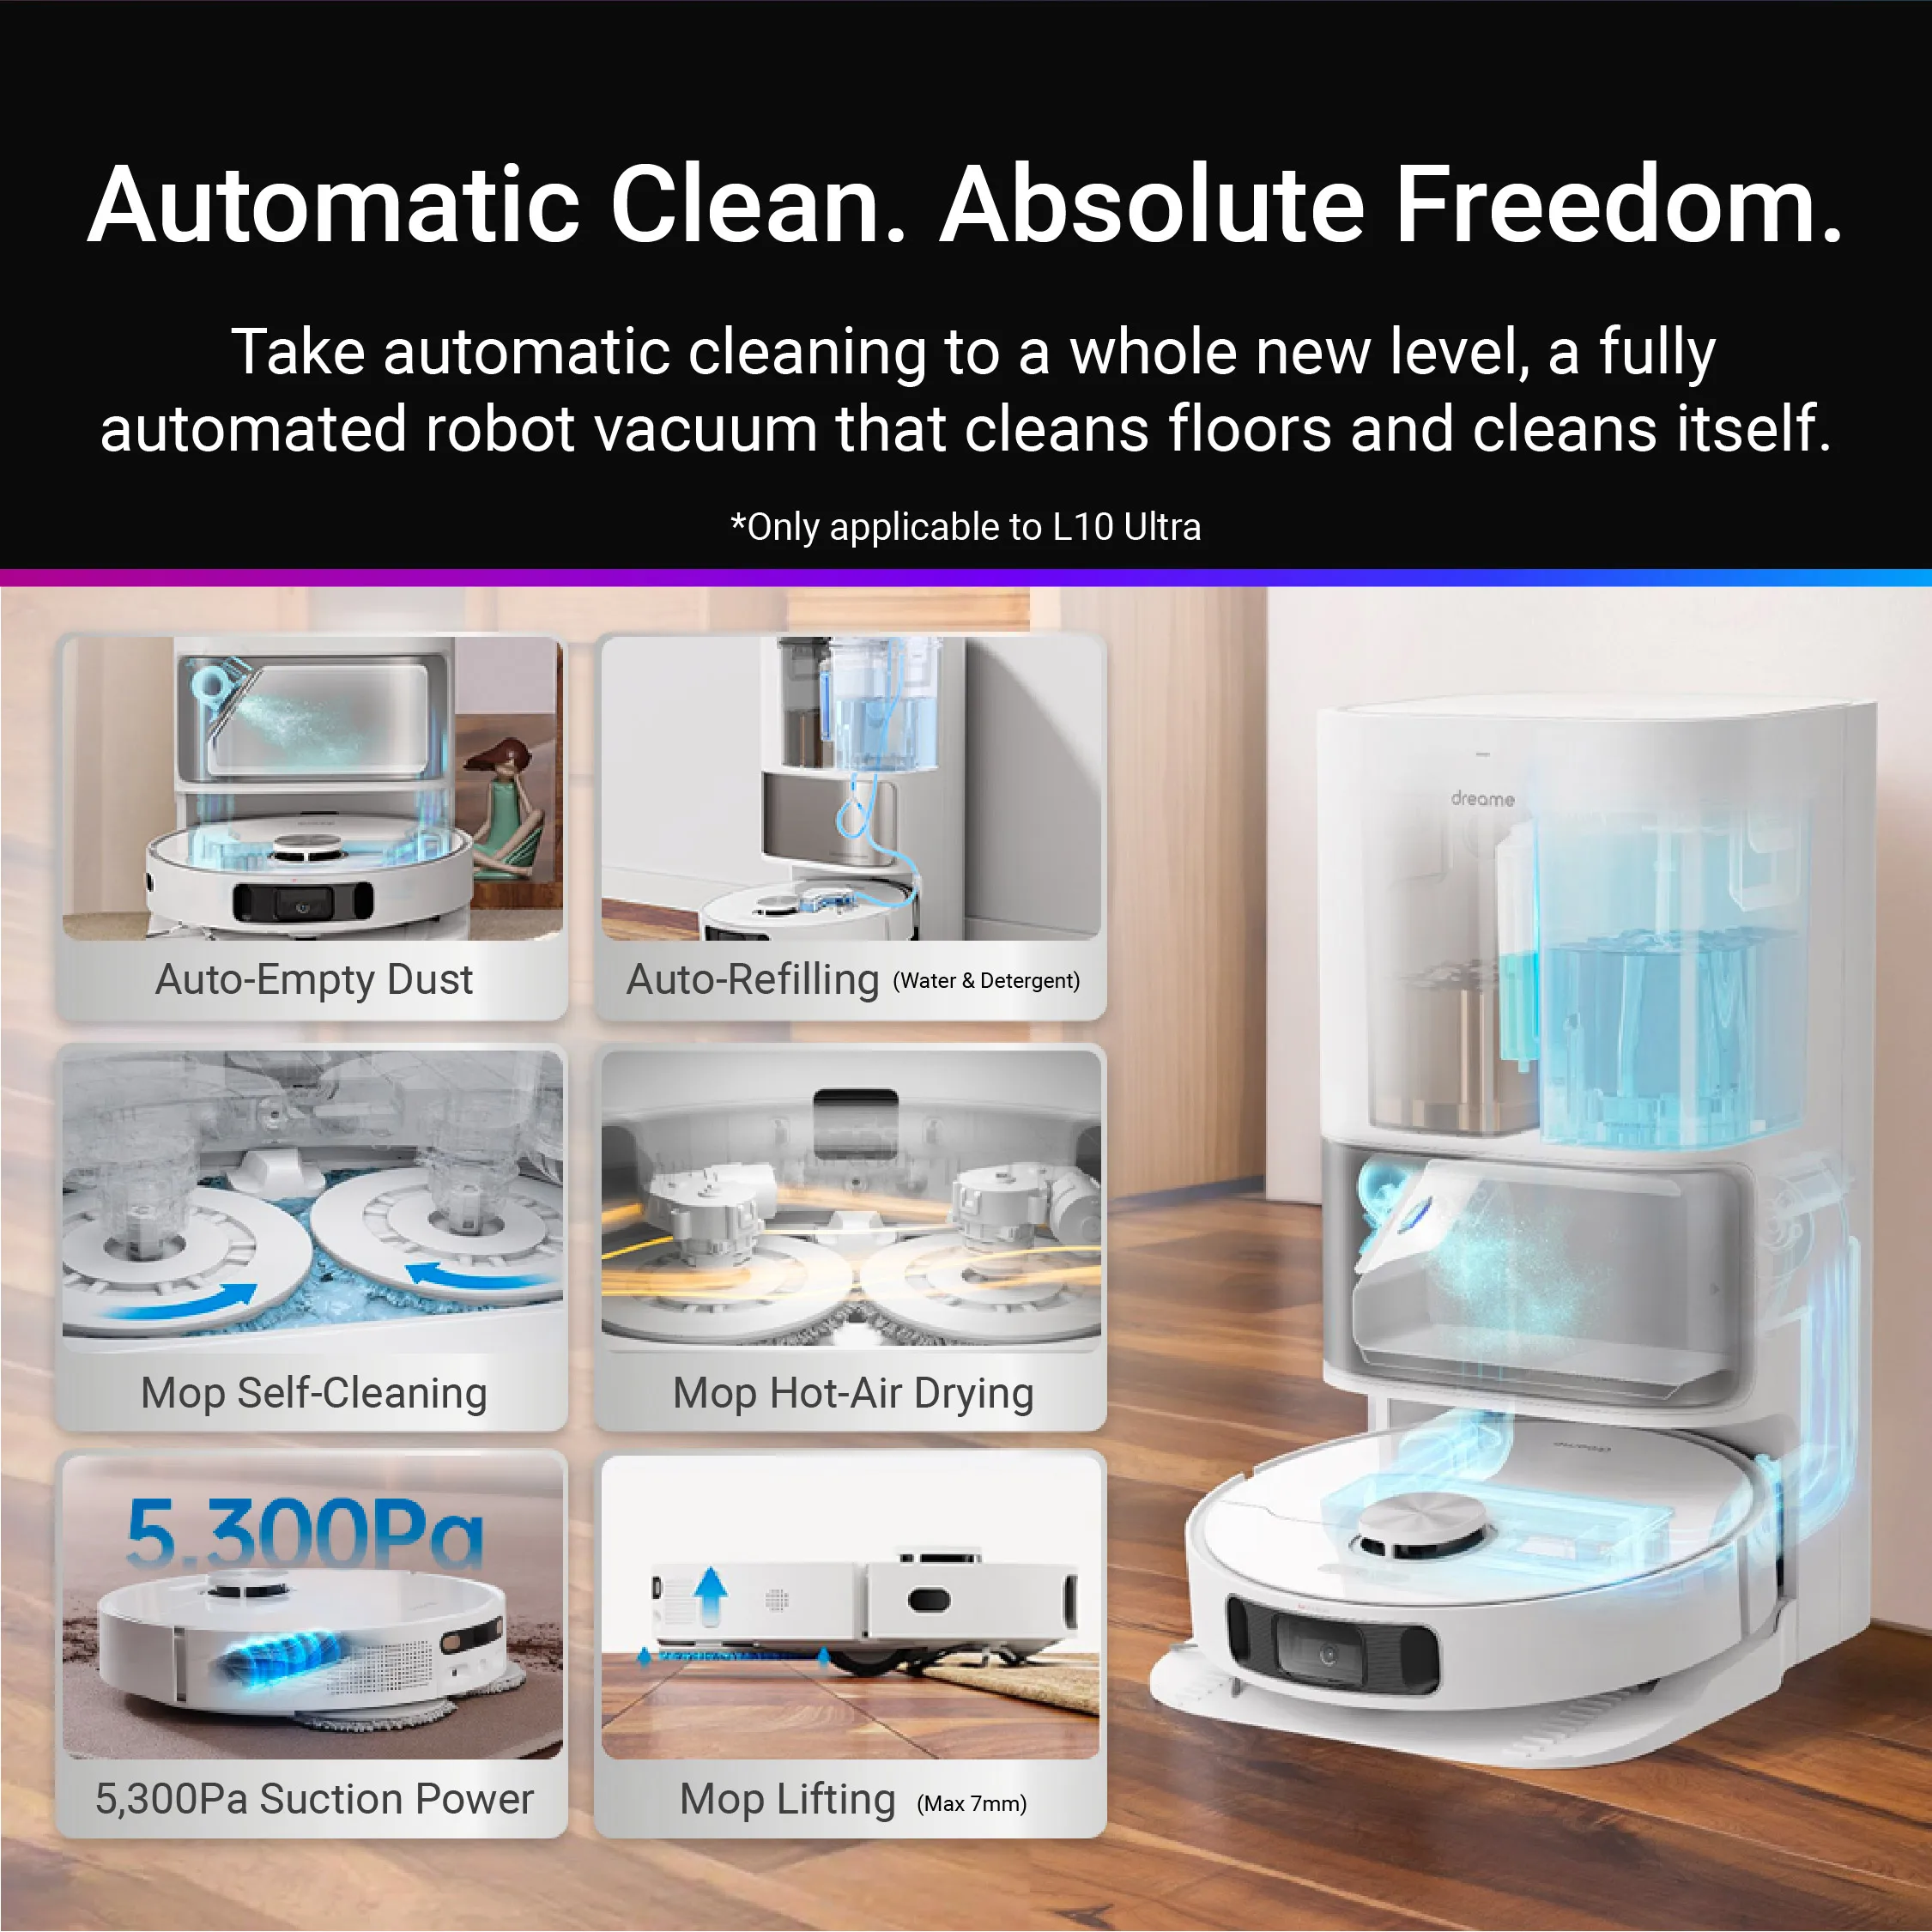 Dreame L10 Prime Robot Vacuum Cleaner for Home, Mop Self-Cleaning & Drying